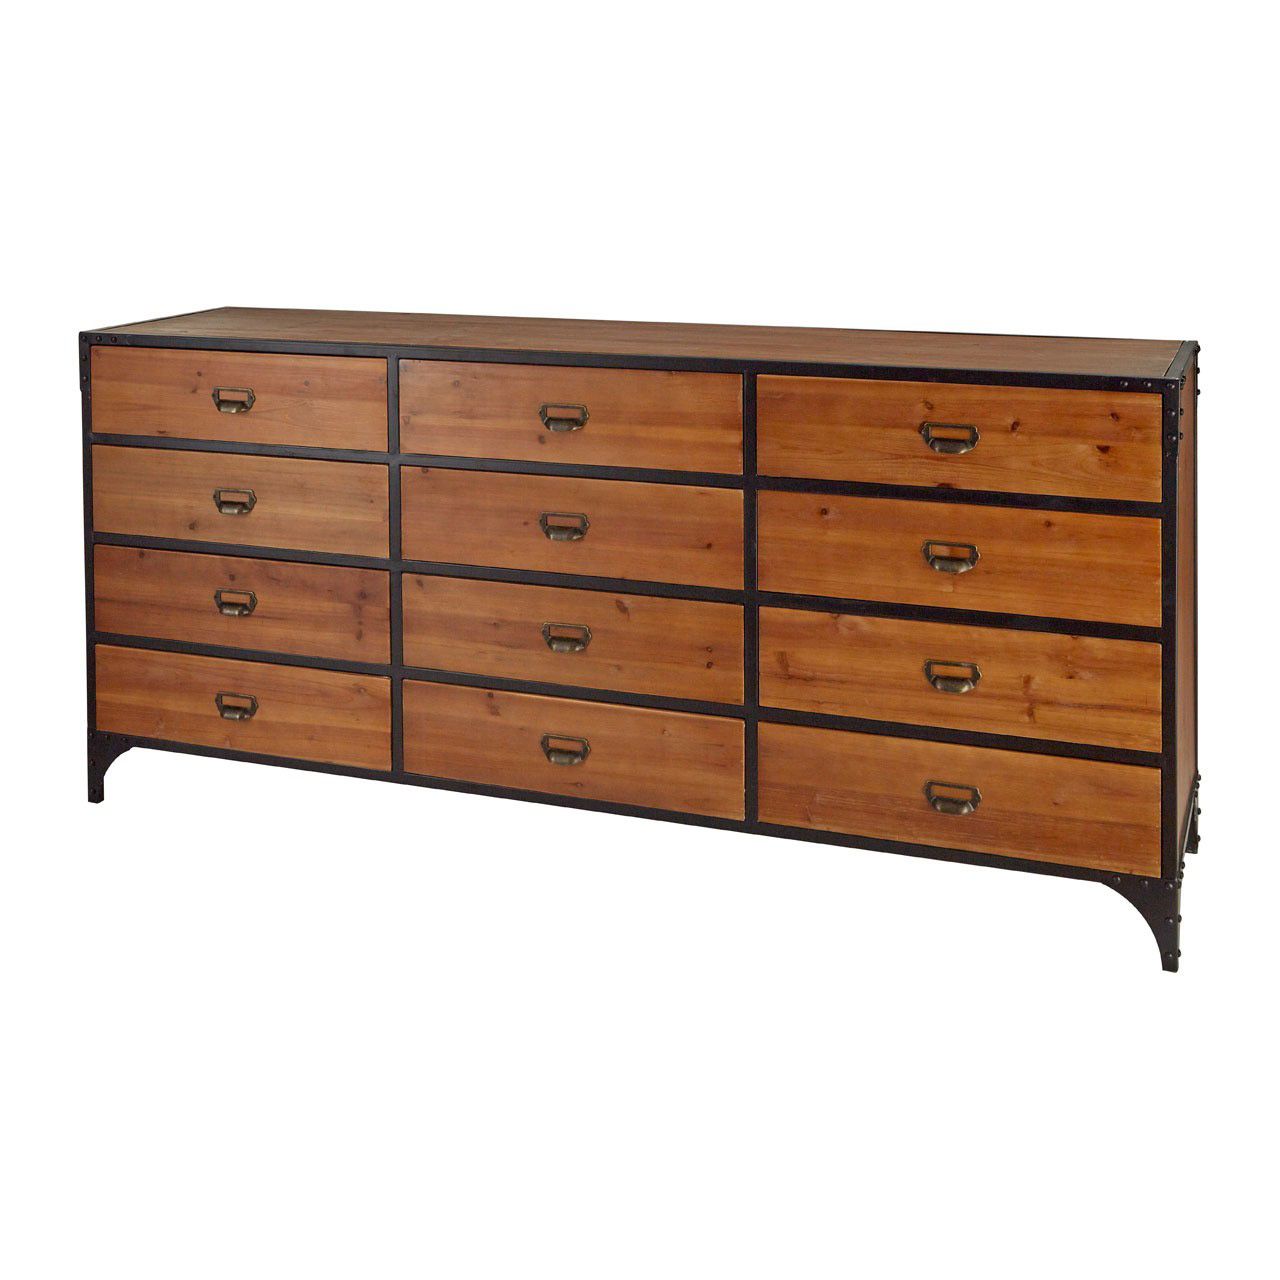 Preferred Foundry 12 Drawer Chest For Sideboards By Foundry Select (View 20 of 20)